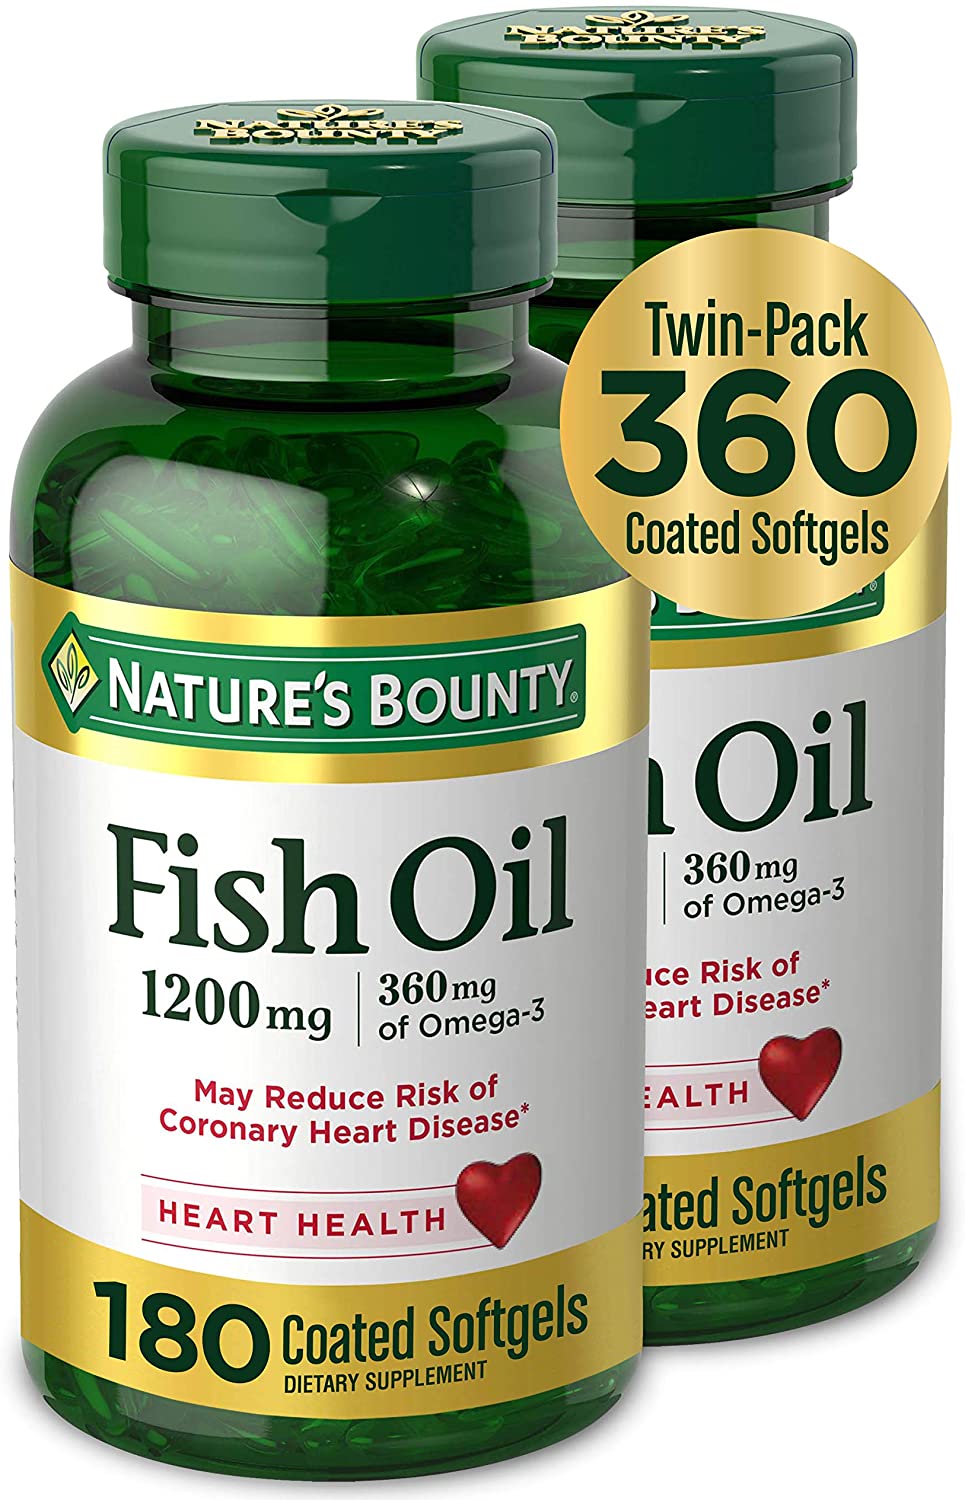 new research on fish oil supplements